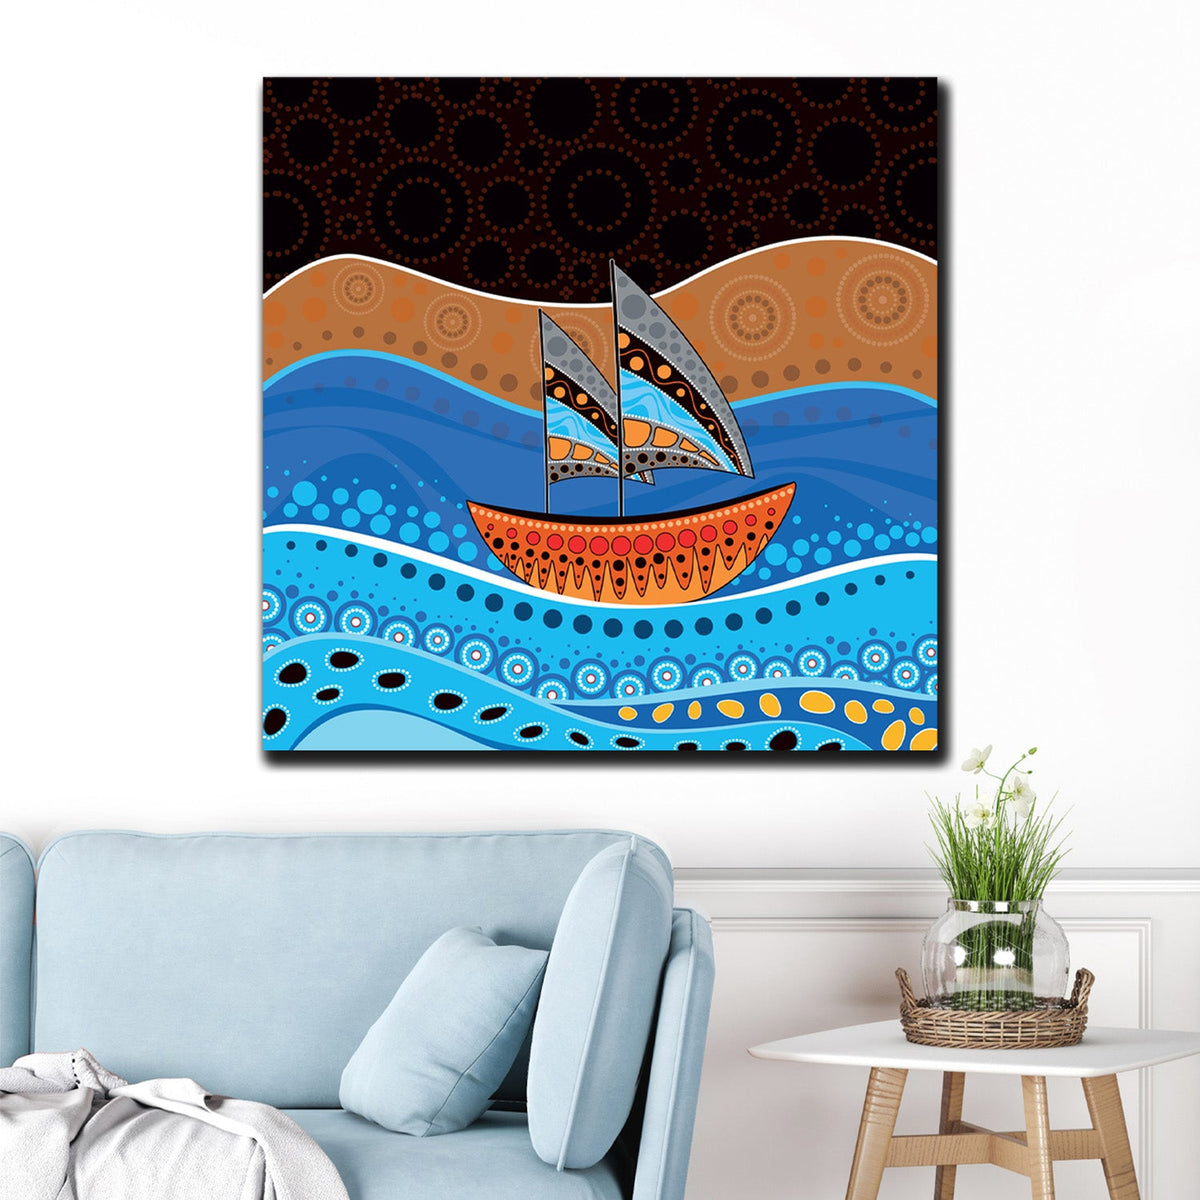 https://cdn.shopify.com/s/files/1/0387/9986/8044/products/BoatinSeaCanvasArtprintStretched-3.jpg